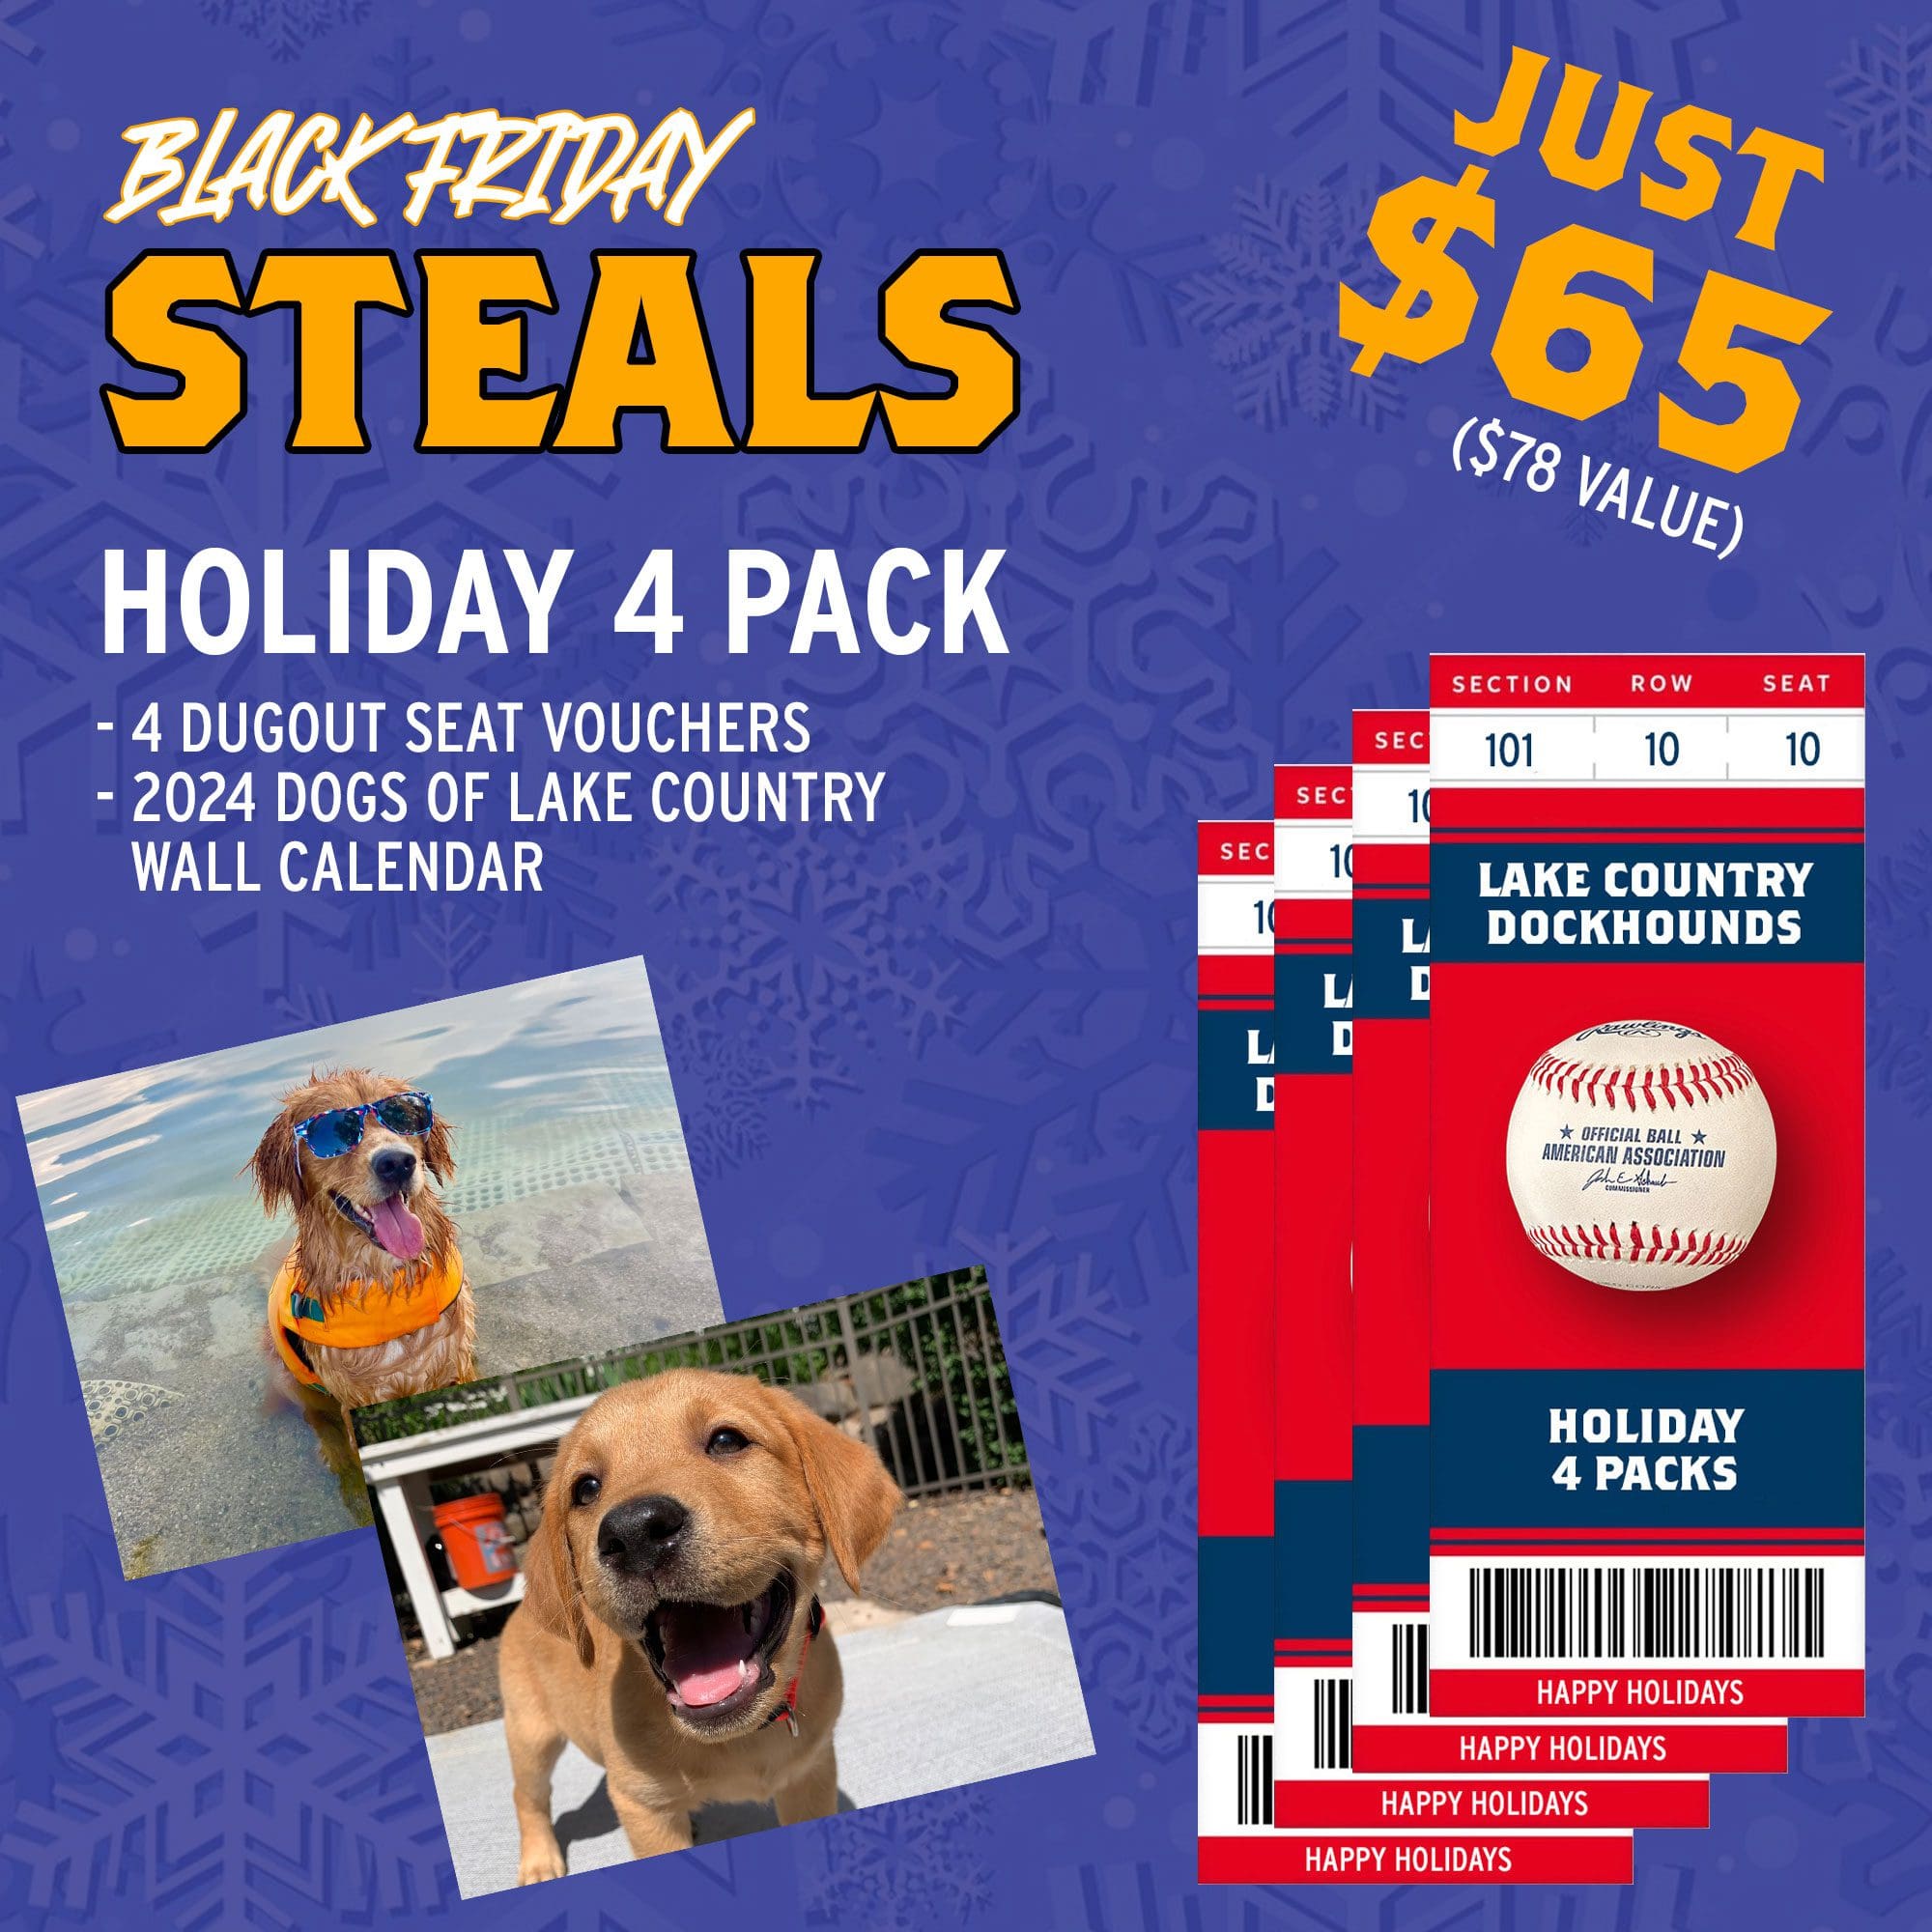 Holiday 4 pack black friday steal